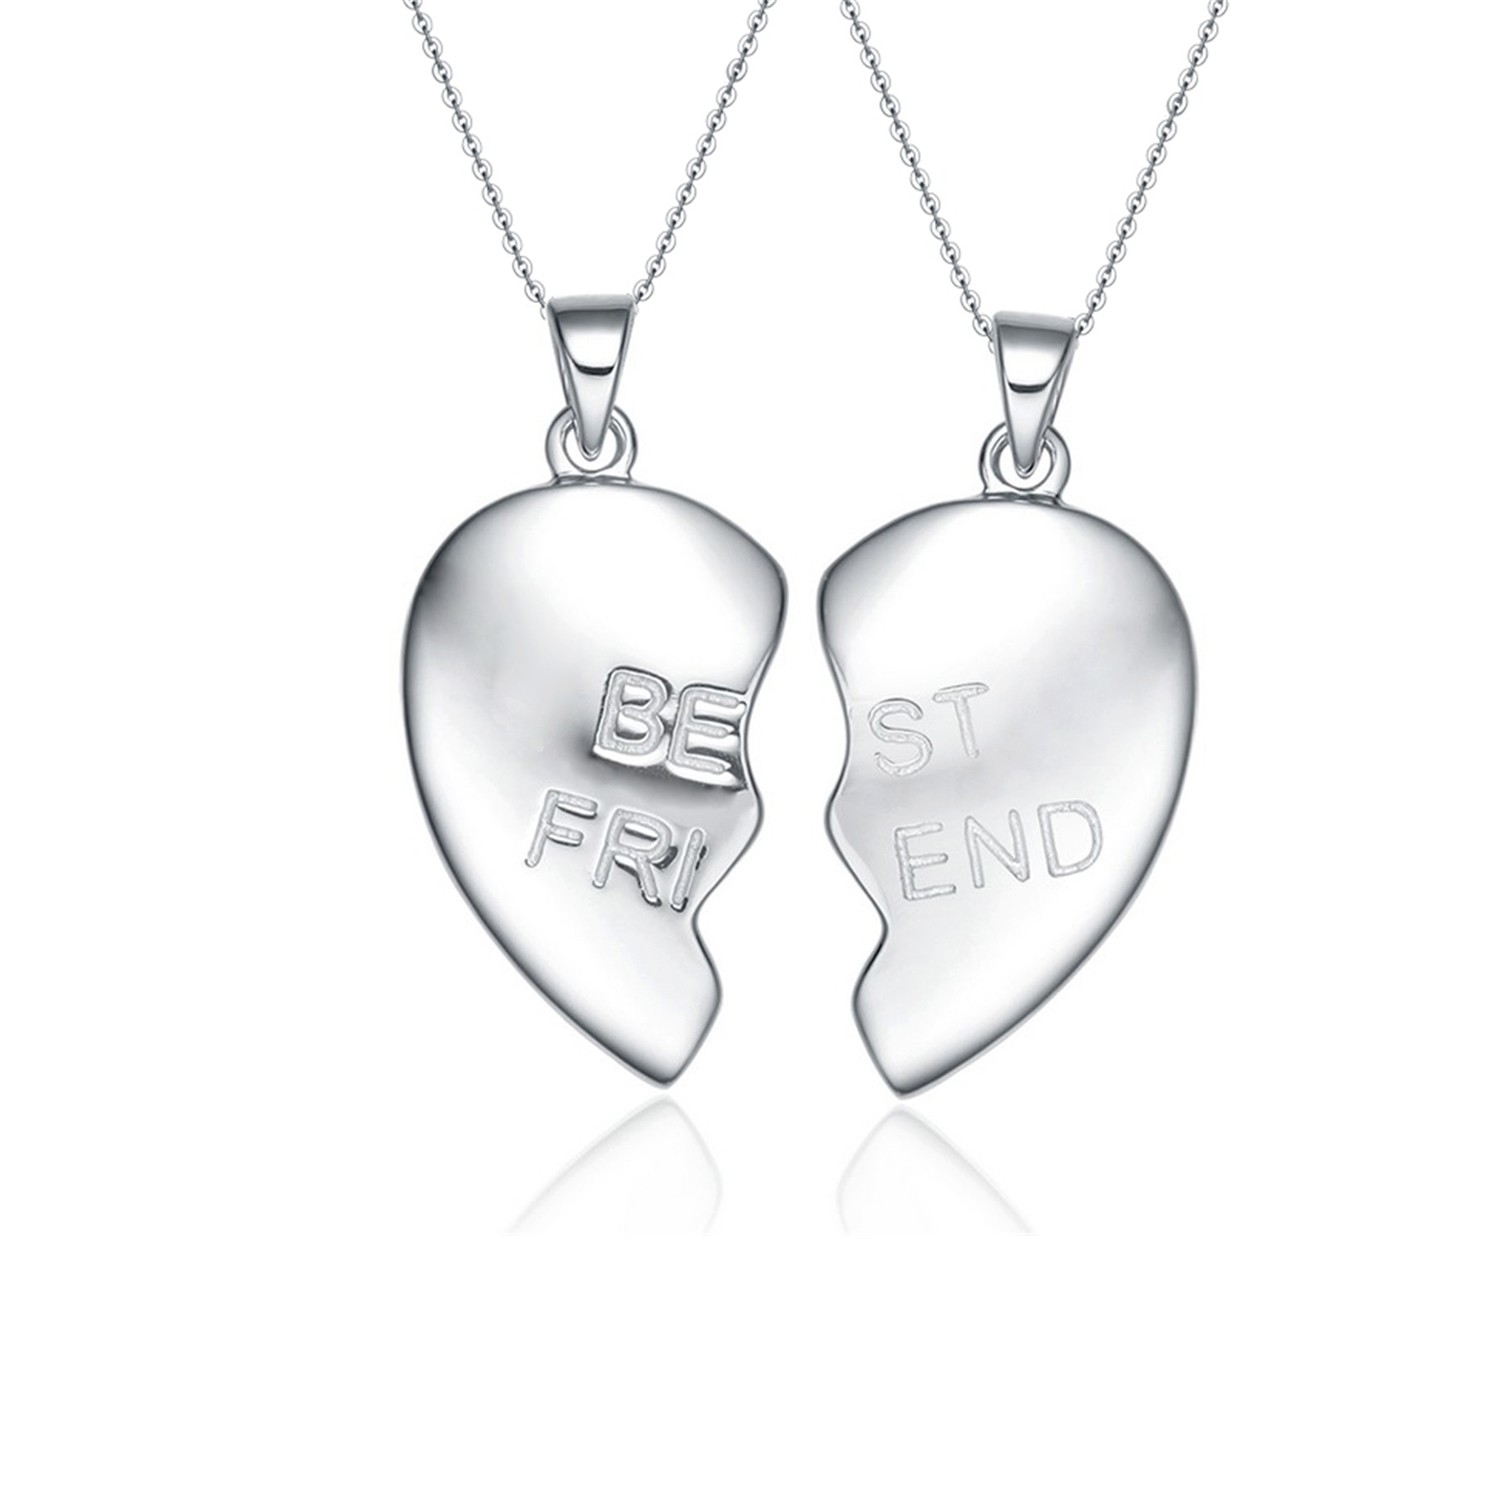 Customized Name Engraved Friendship jewelry 925 Sterling Silver Couple Broken Heart Pendant Necklace